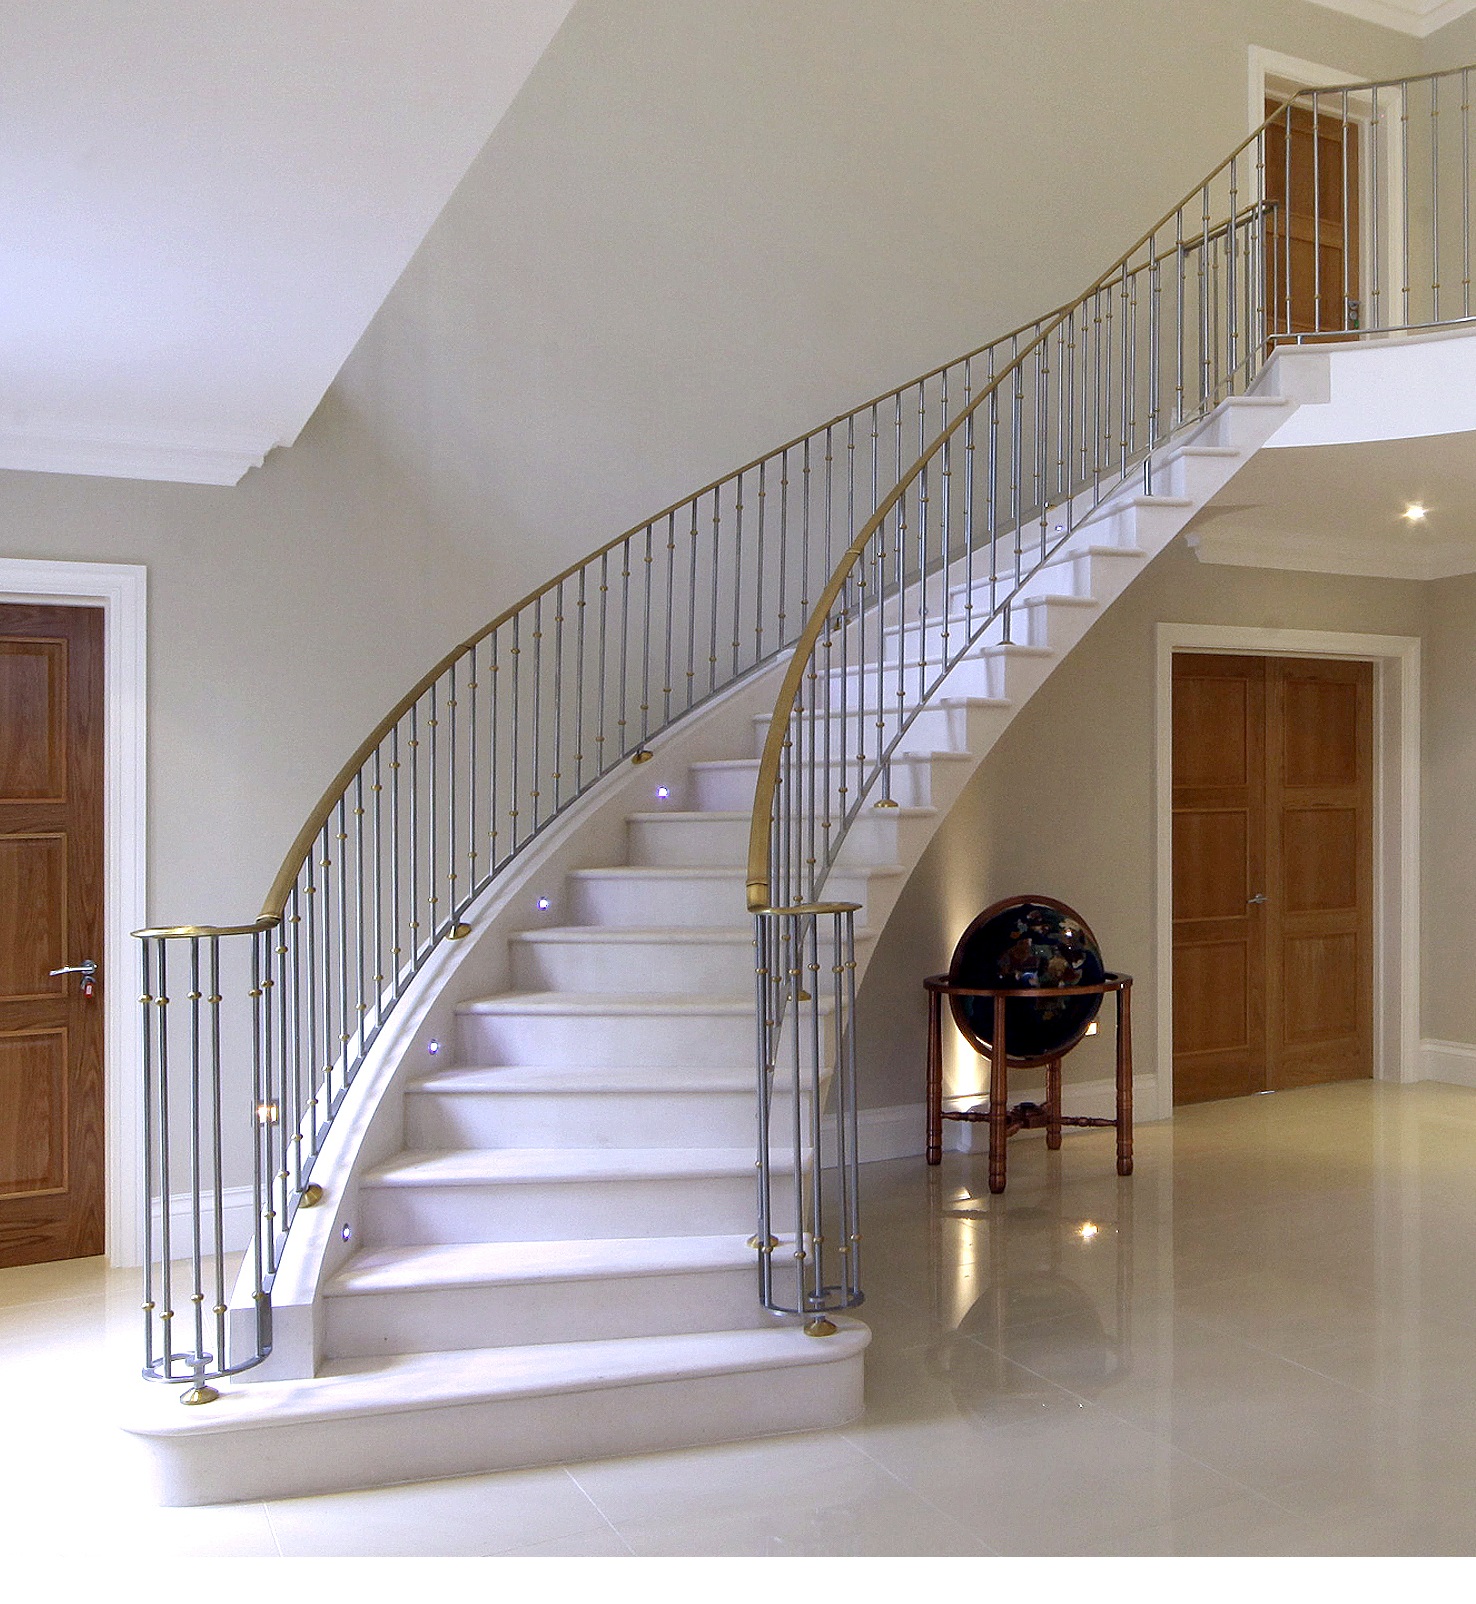 12. Steel-supported honed Moleanos staircase with polished Moleanos stone flooring – Hertfordshire